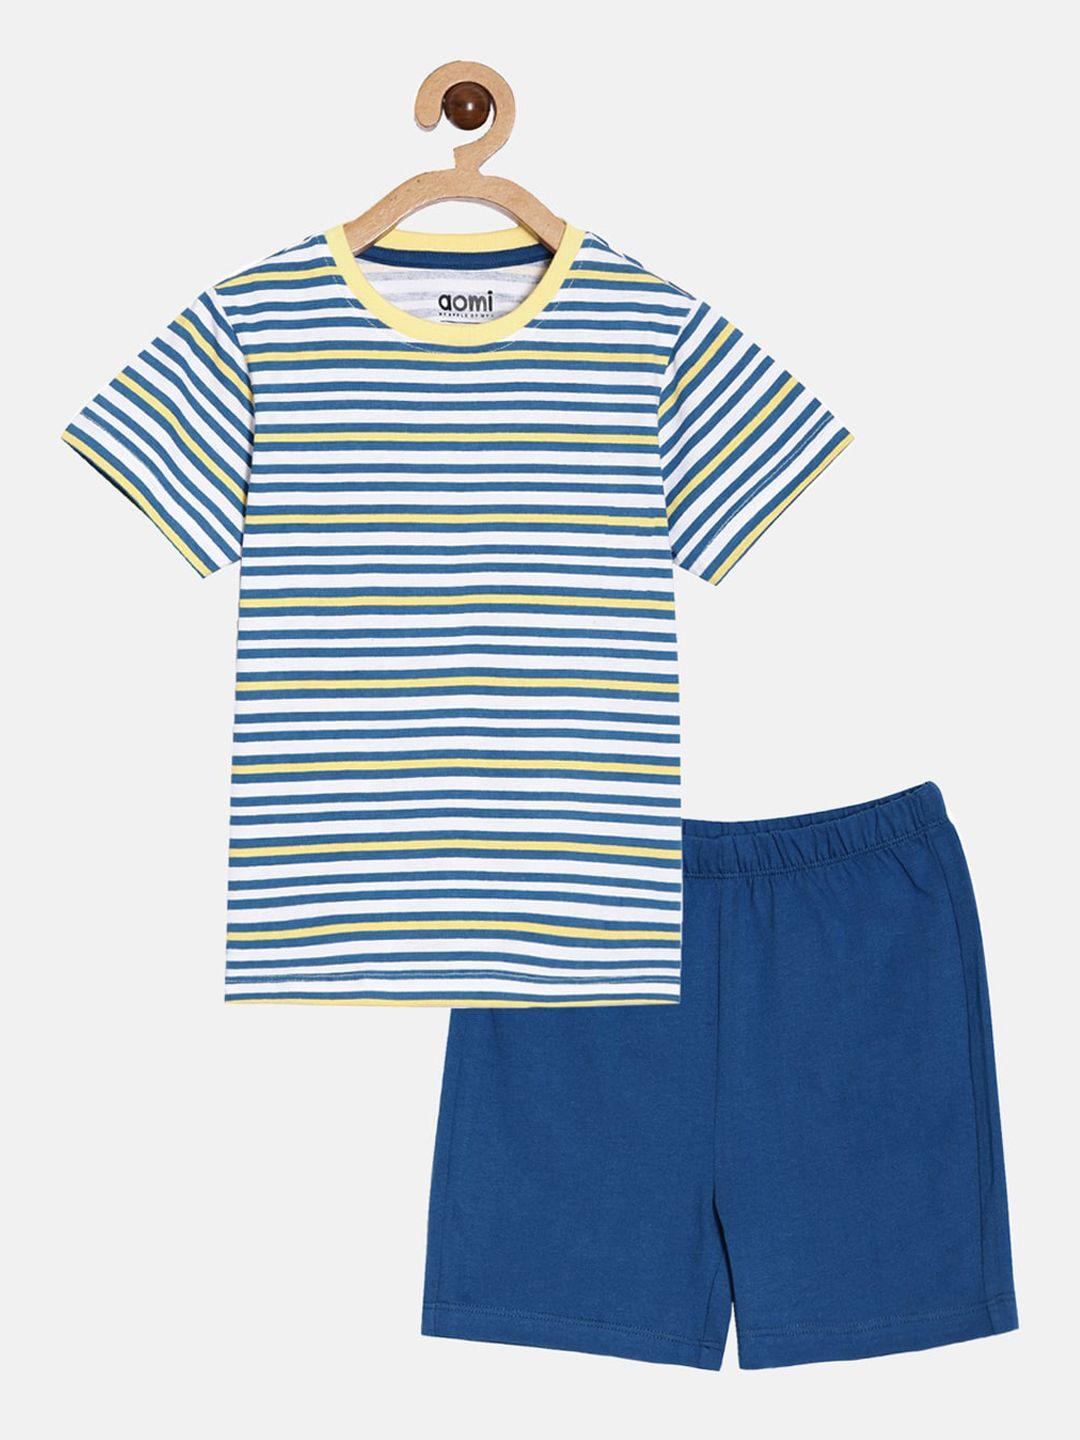 aomi-boys-blue-&-white-printed-t-shirt-with-shorts